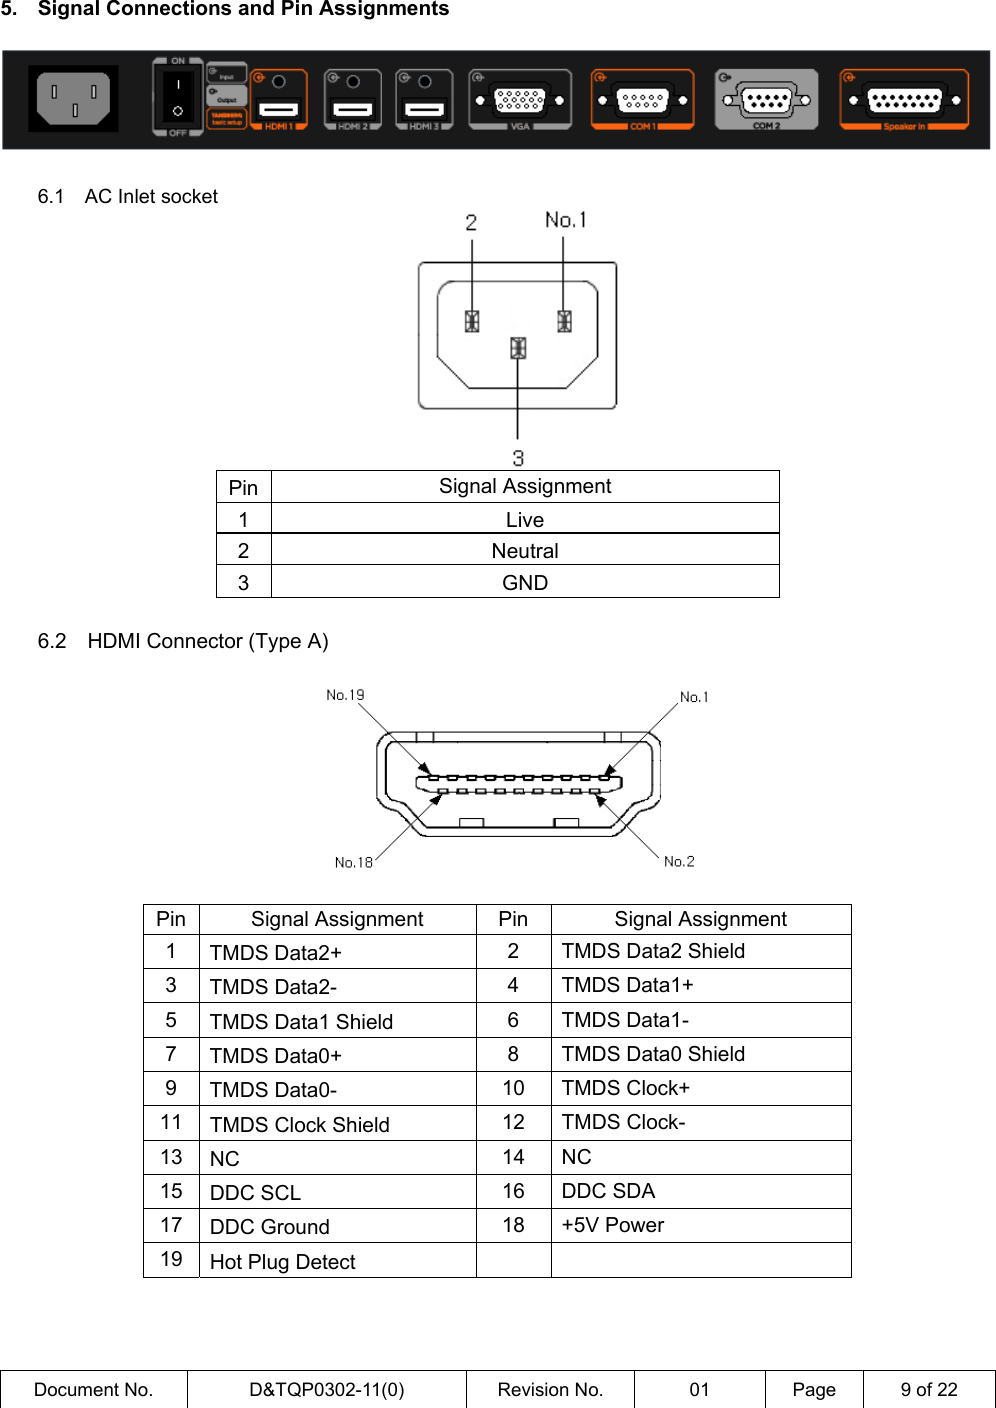  Document No.  D&amp;TQP0302-11(0)  Revision No.  01  Page  9 of 22  5.  Signal Connections and Pin Assignments     6.1  AC Inlet socket  Pin Signal Assignment 1 Live 2 Neutral 3 GND    6.2  HDMI Connector (Type A)    Pin  Signal Assignment  Pin  Signal Assignment 1  TMDS Data2+  2 TMDS Data2 Shield 3  TMDS Data2-  4 TMDS Data1+ 5  TMDS Data1 Shield  6 TMDS Data1- 7  TMDS Data0+  8 TMDS Data0 Shield 9  TMDS Data0-  10 TMDS Clock+ 11  TMDS Clock Shield  12 TMDS Clock- 13  NC  14 NC 15  DDC SCL  16 DDC SDA 17  DDC Ground  18 +5V Power 19  Hot Plug Detect      